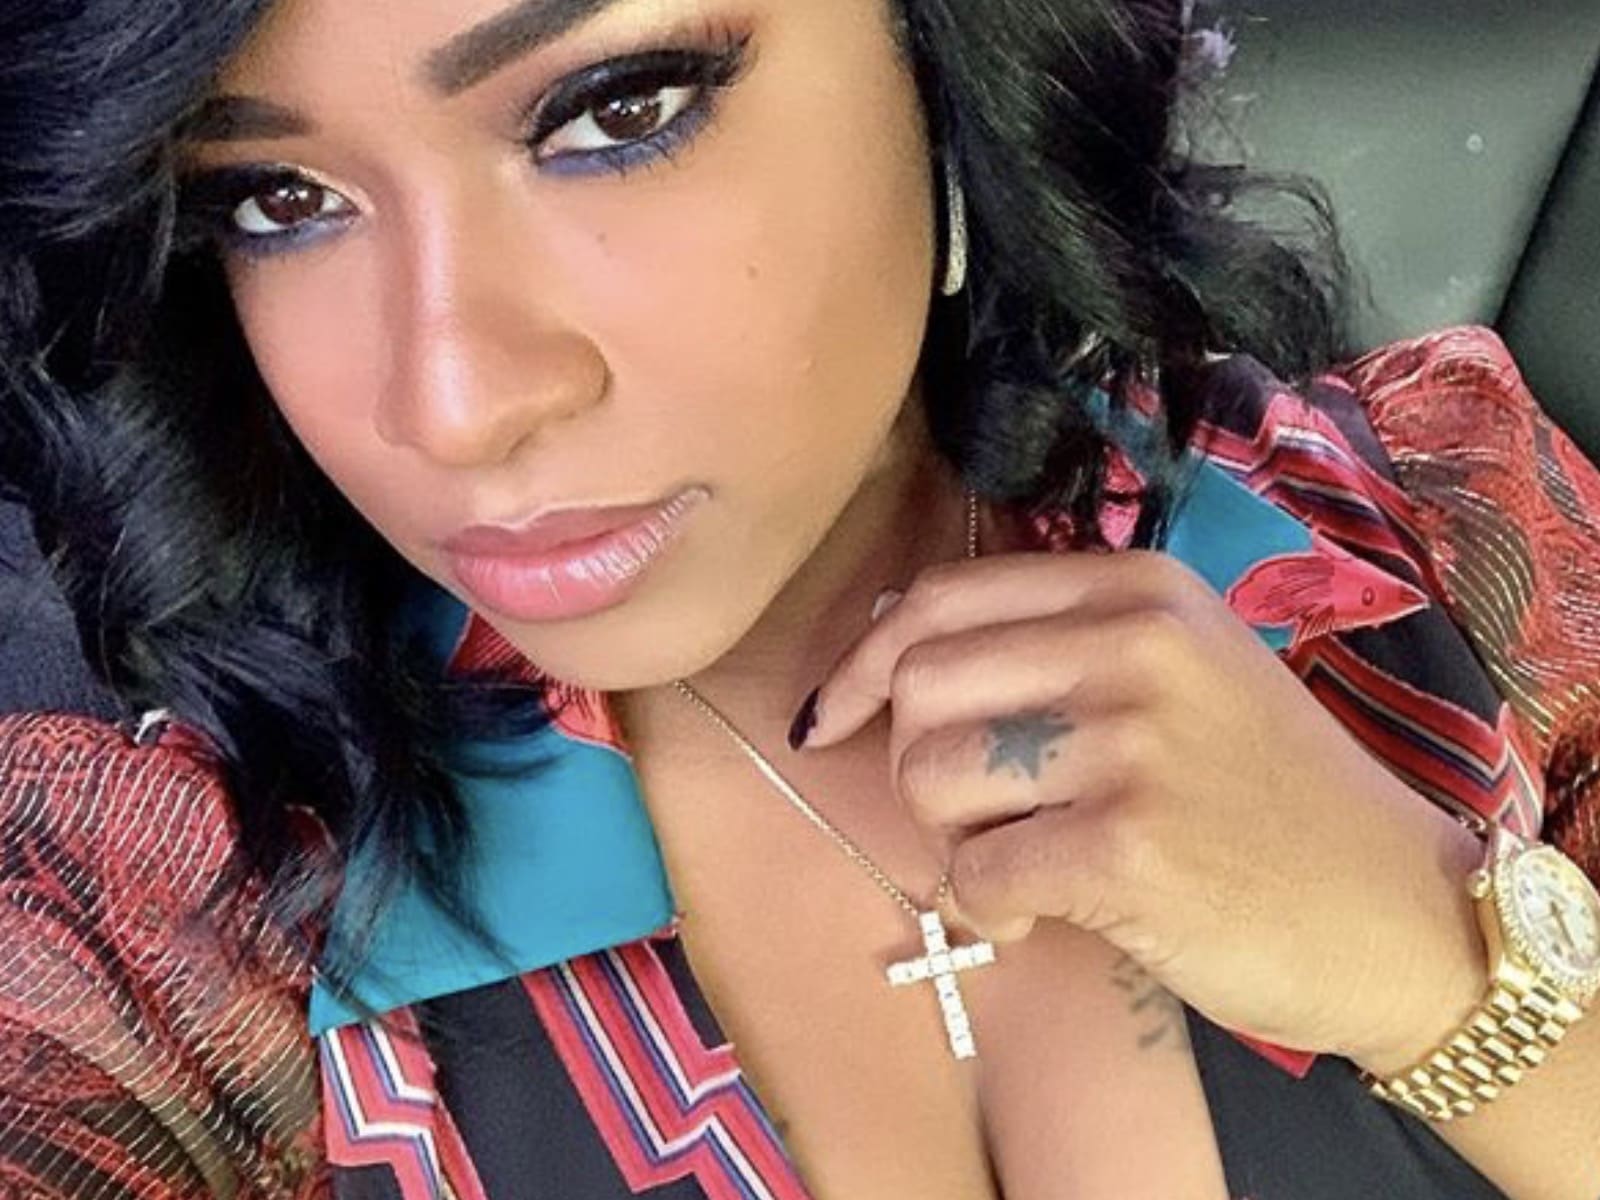 Toya Wright Gives Her Fans A Closer Look At Her Engagement Ring - See The Clips!